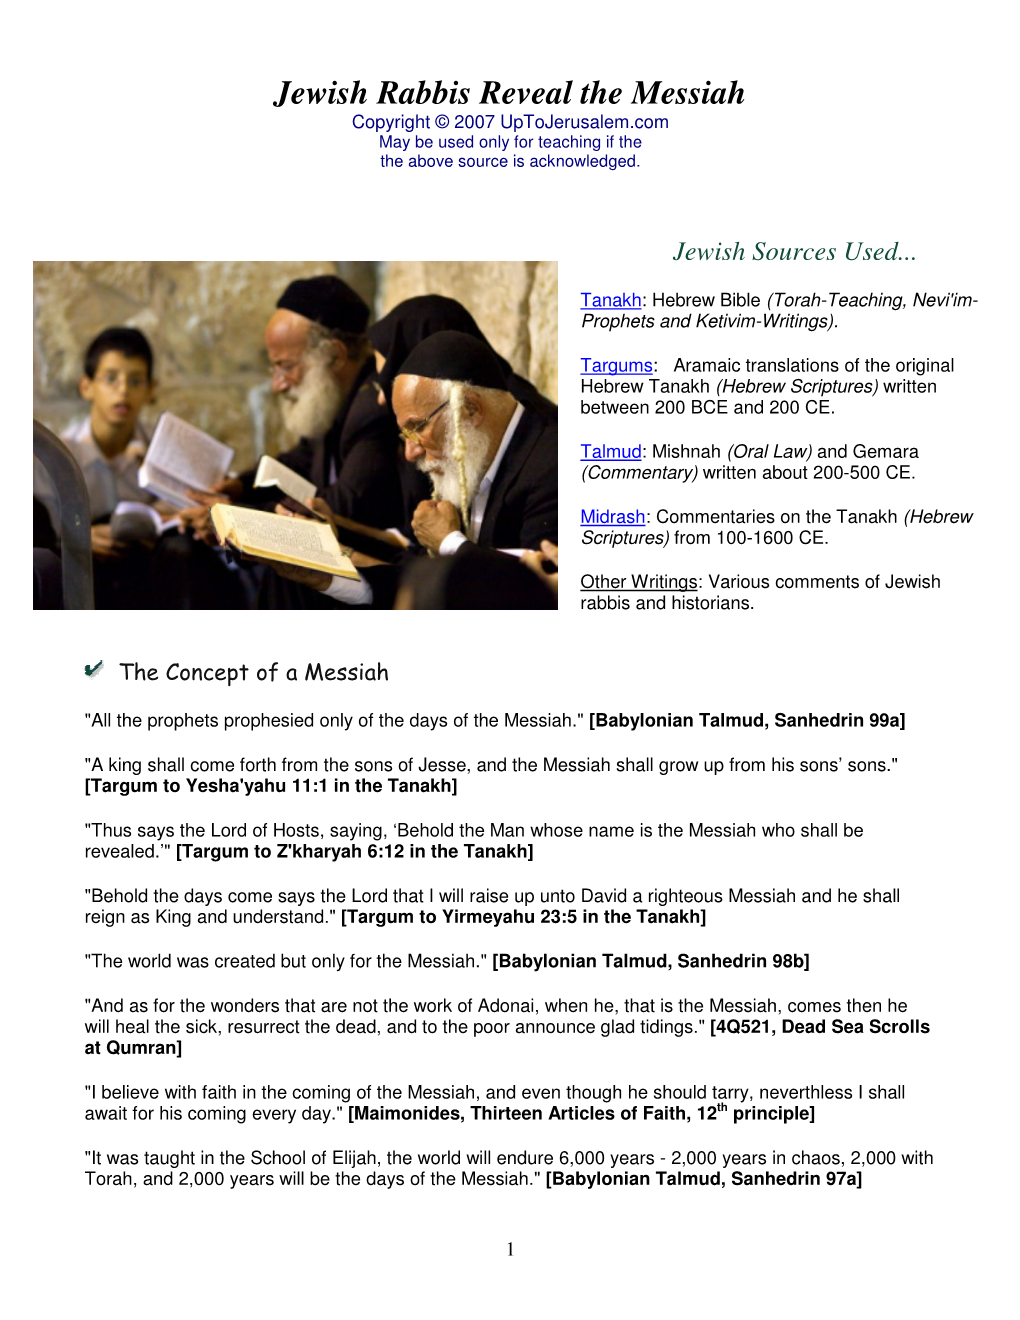 Jewish Rabbis Reveal the Messiah Copyright © 2007 Uptojerusalem.Com May Be Used Only for Teaching If the the Above Source Is Acknowledged